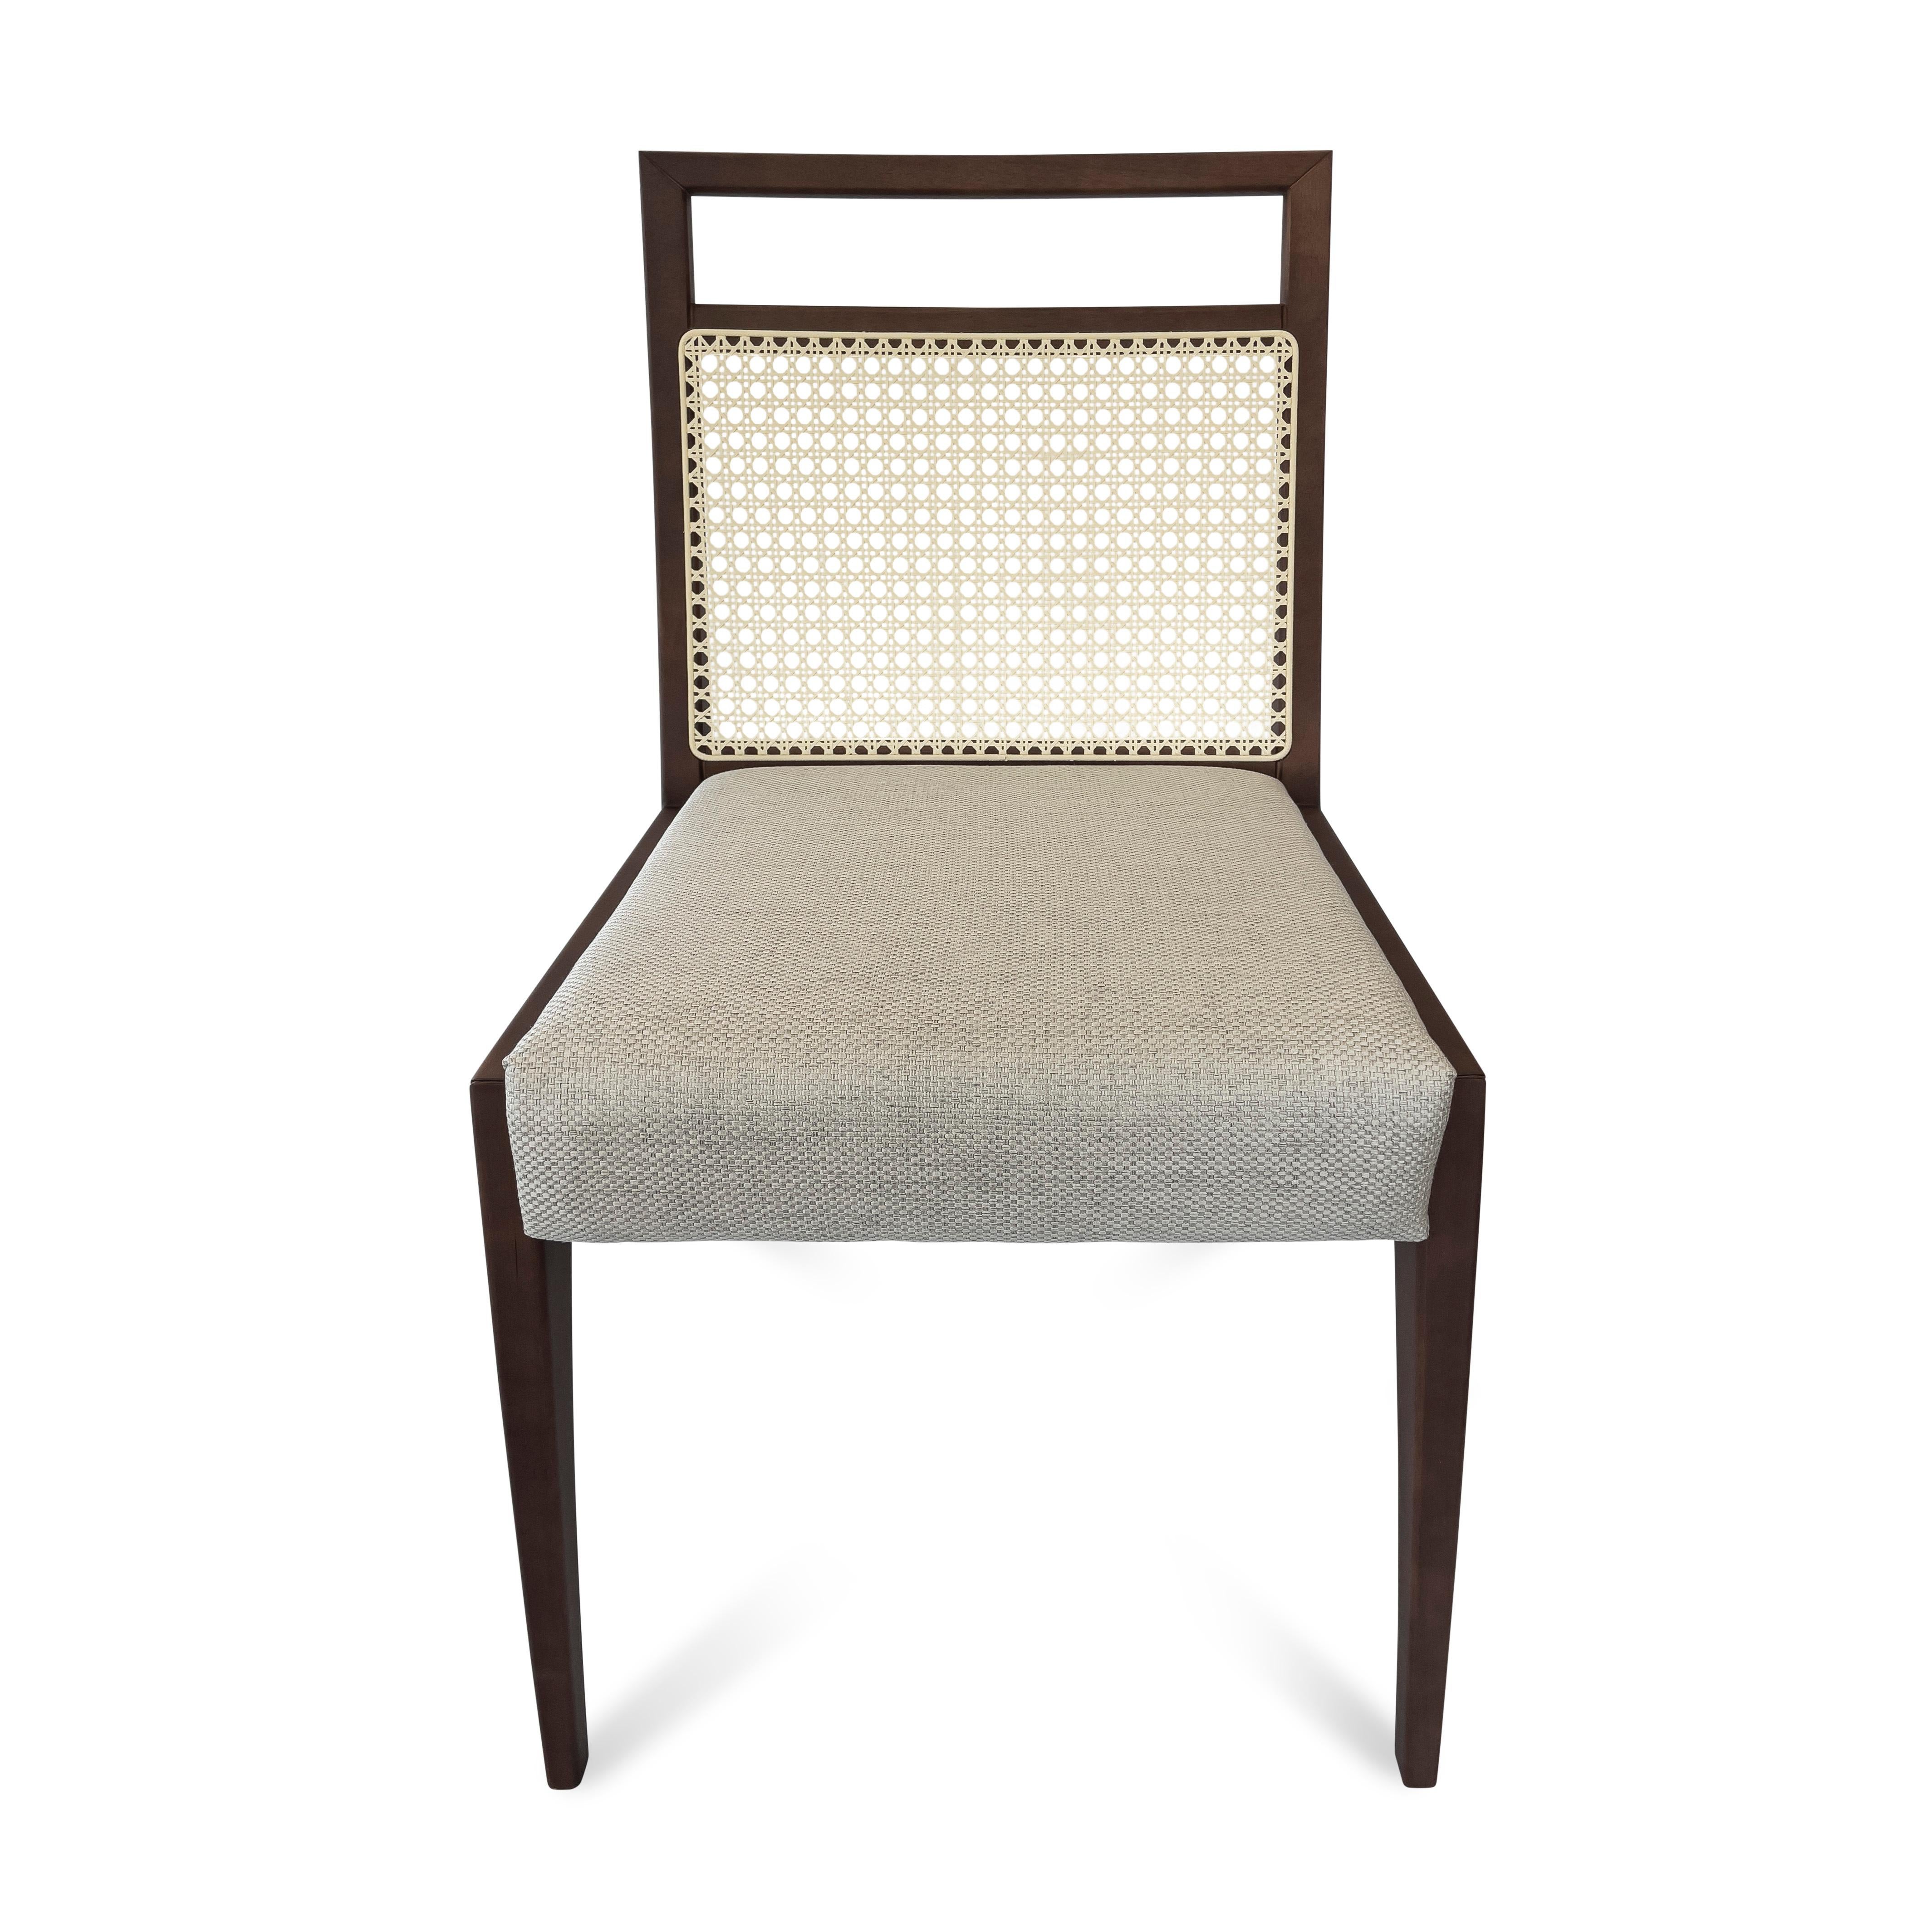 Putting a lot of effort our amazing Uultis team has created the Sotto dining chair, thinking of every possible detail like the cane back that just blends perfectly with the walnut wood finish and the oatmeal fabric. This pair of chairs are beautiful